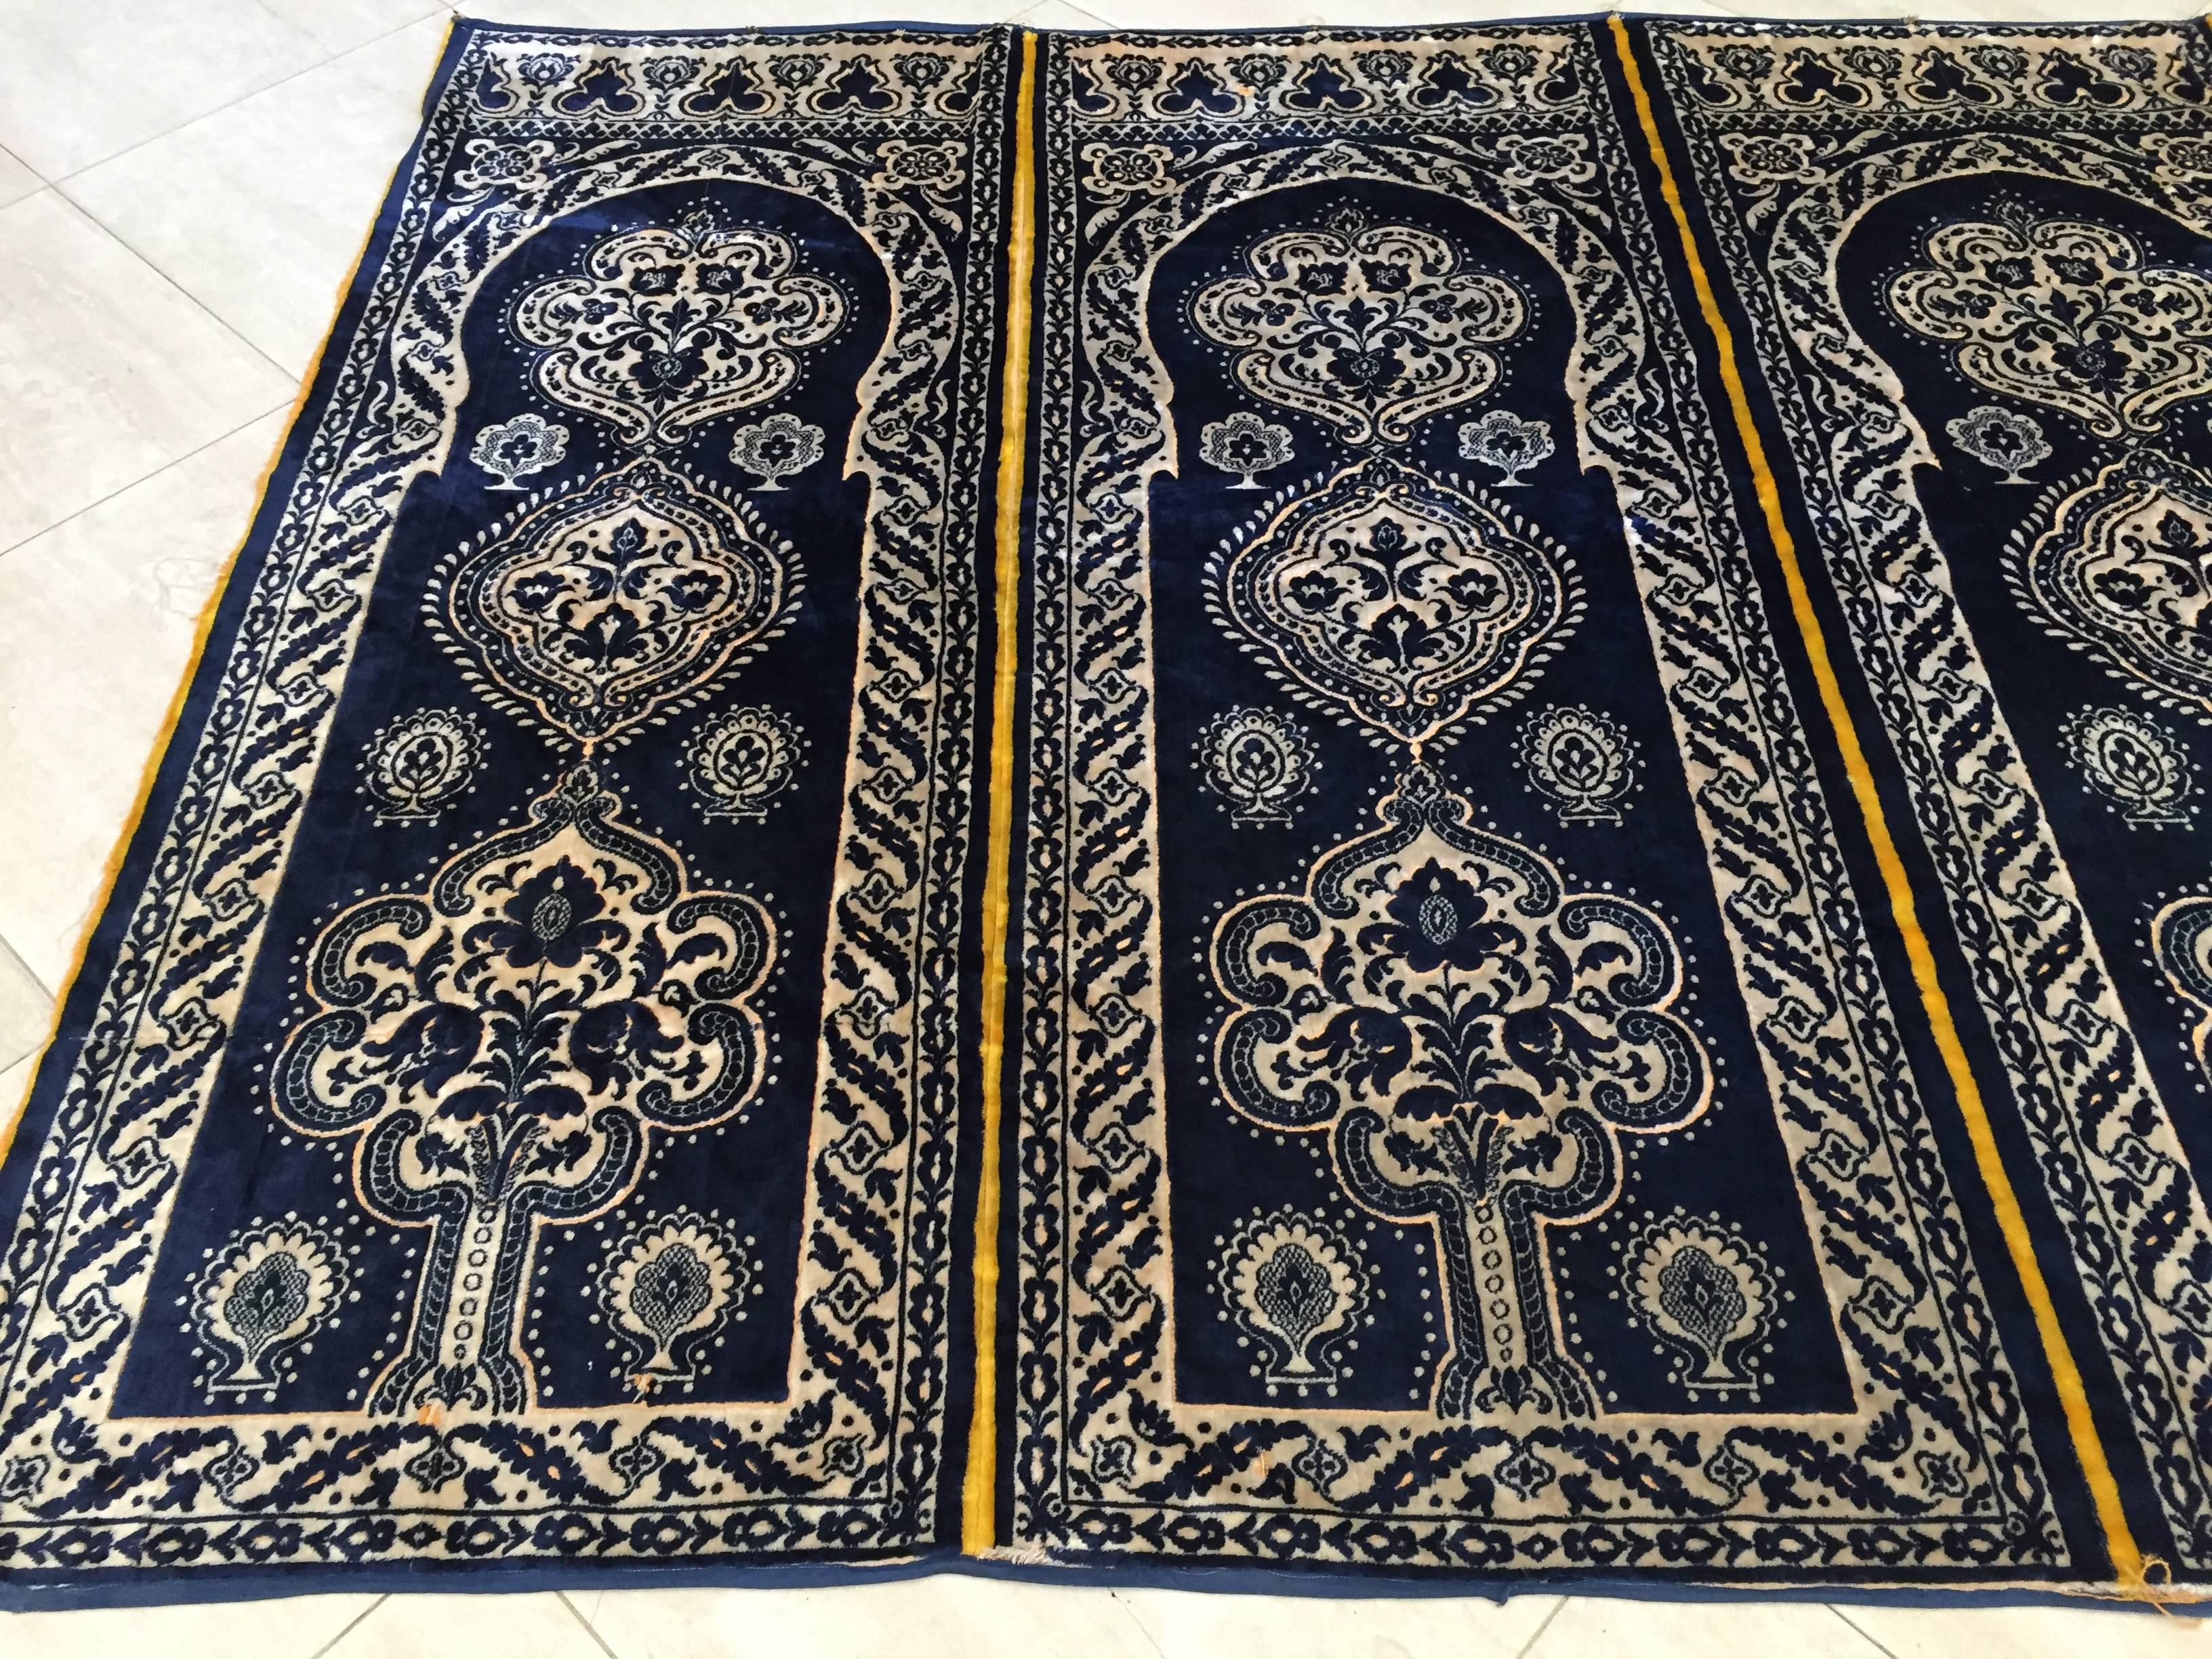 Antique Moroccan Moorish silk tapestry. 
Silk velvet cut designs, yellow, cream and blue, the panel consist on four arches with Islamic floral designs. 
Antique textiles from early 1900s. 
Each arch panel is 62